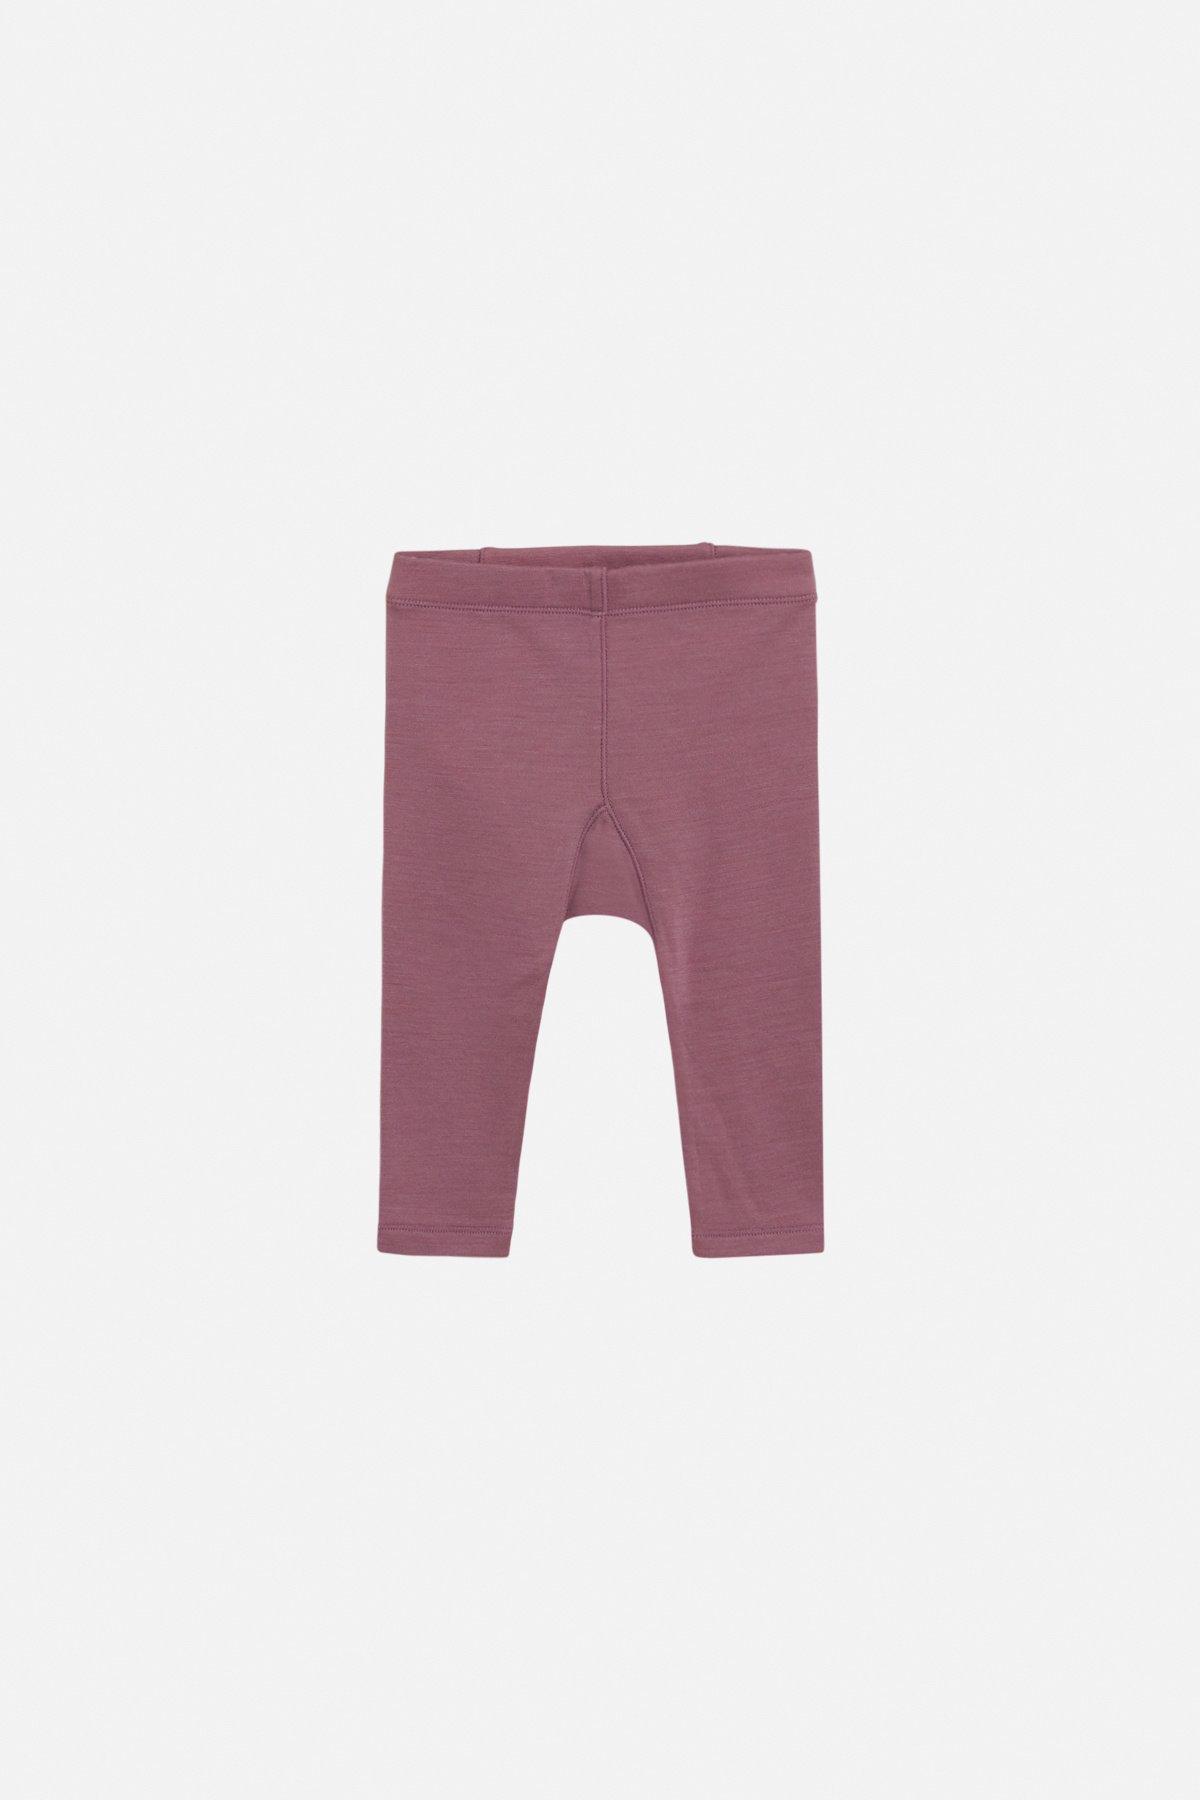 Hust and Claire  Woll Leggings Lotta Pale mauve 